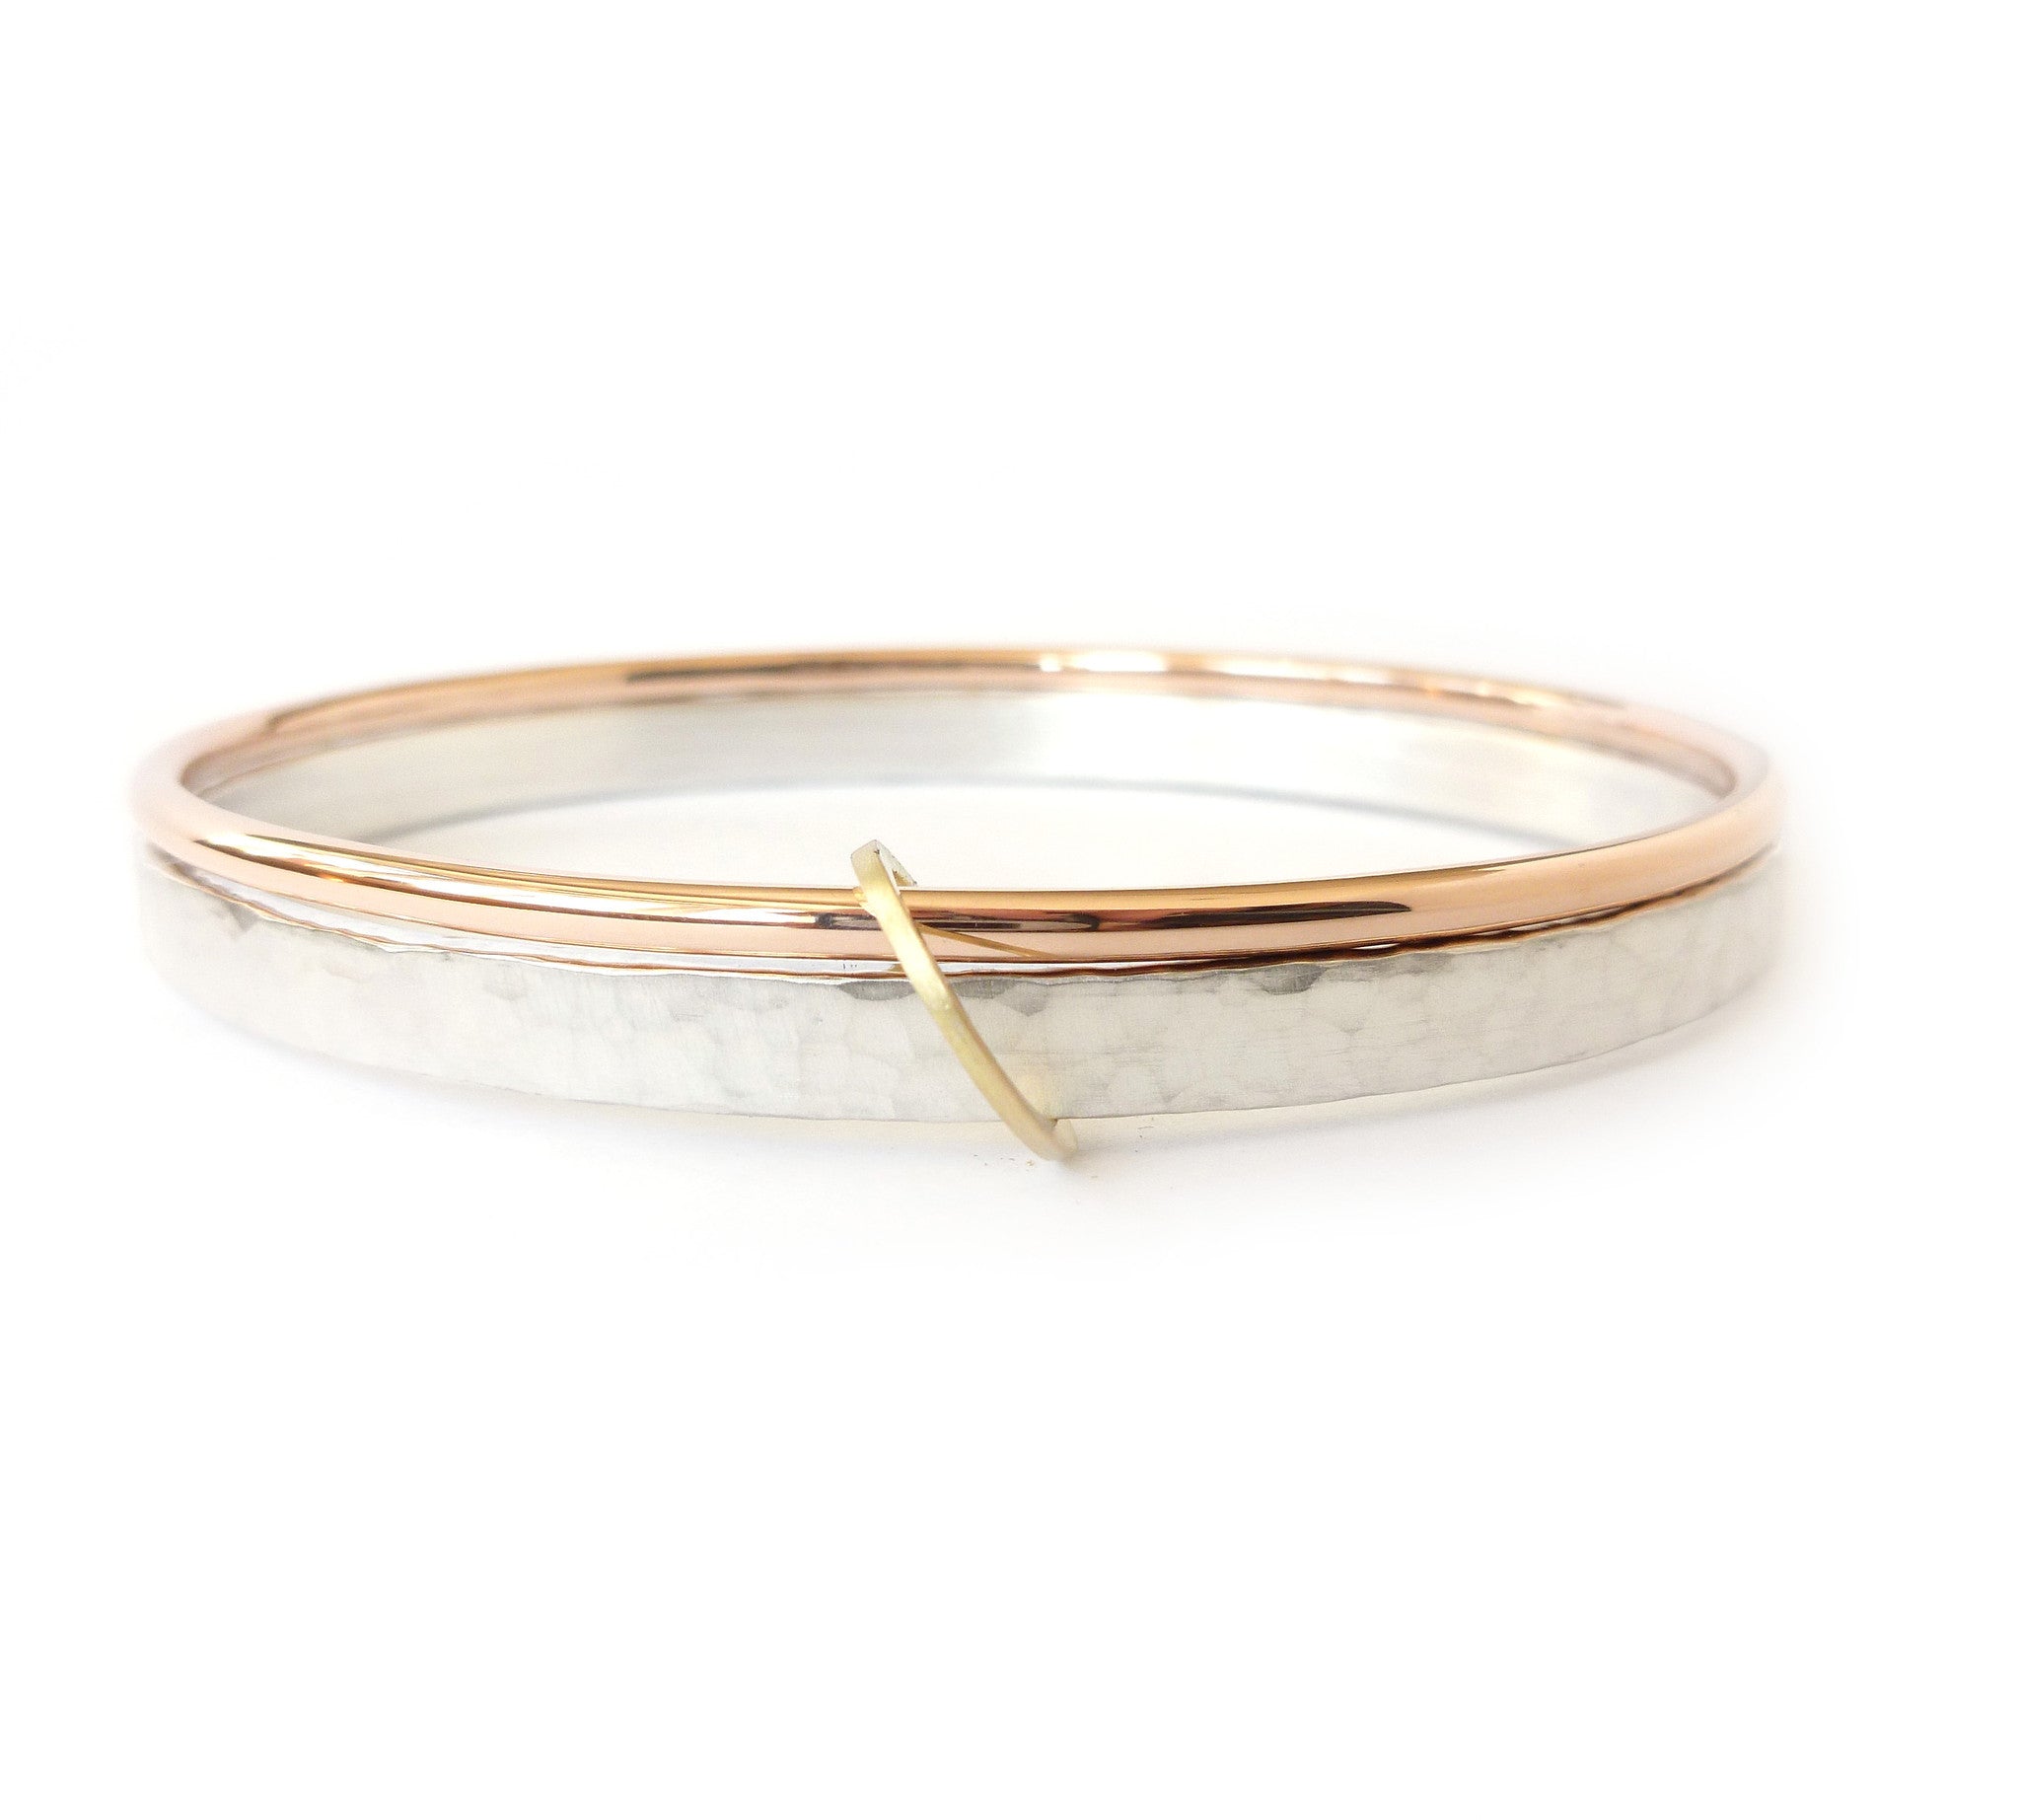 Unusual, unique, bespoke and modern three colour gold and silver bangle with brushed finish. Handmade by Sue Lane Contempoary Jewellery in Herefordshire, UK